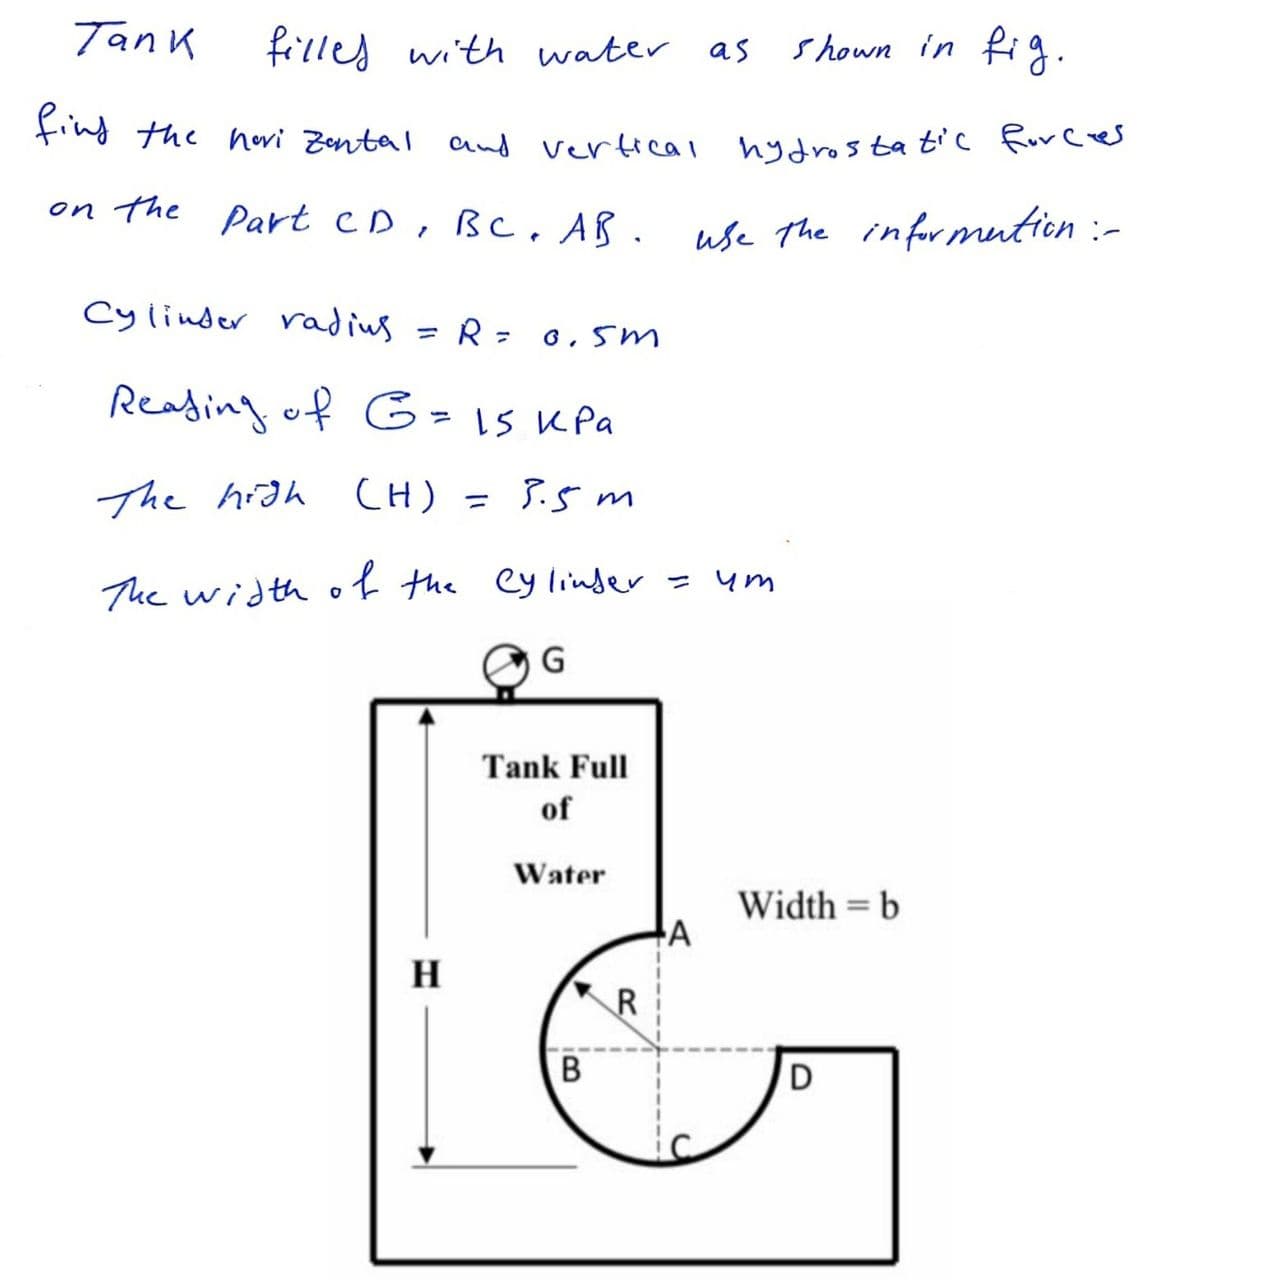 Tank
filles with water as
shown in fig.
fing the hevi Zental and vertical hydrostatic Force
on the Part CD, BC . AB.
use The informution :-
Cylinder radiug
R= 0,5m
%3D
Reading of 5=1S KPa
The hidh
CH) = 3.5 m
%3D
The width of the ey linder = ym
G
Tank Full
of
Water
Width = b
H
R
